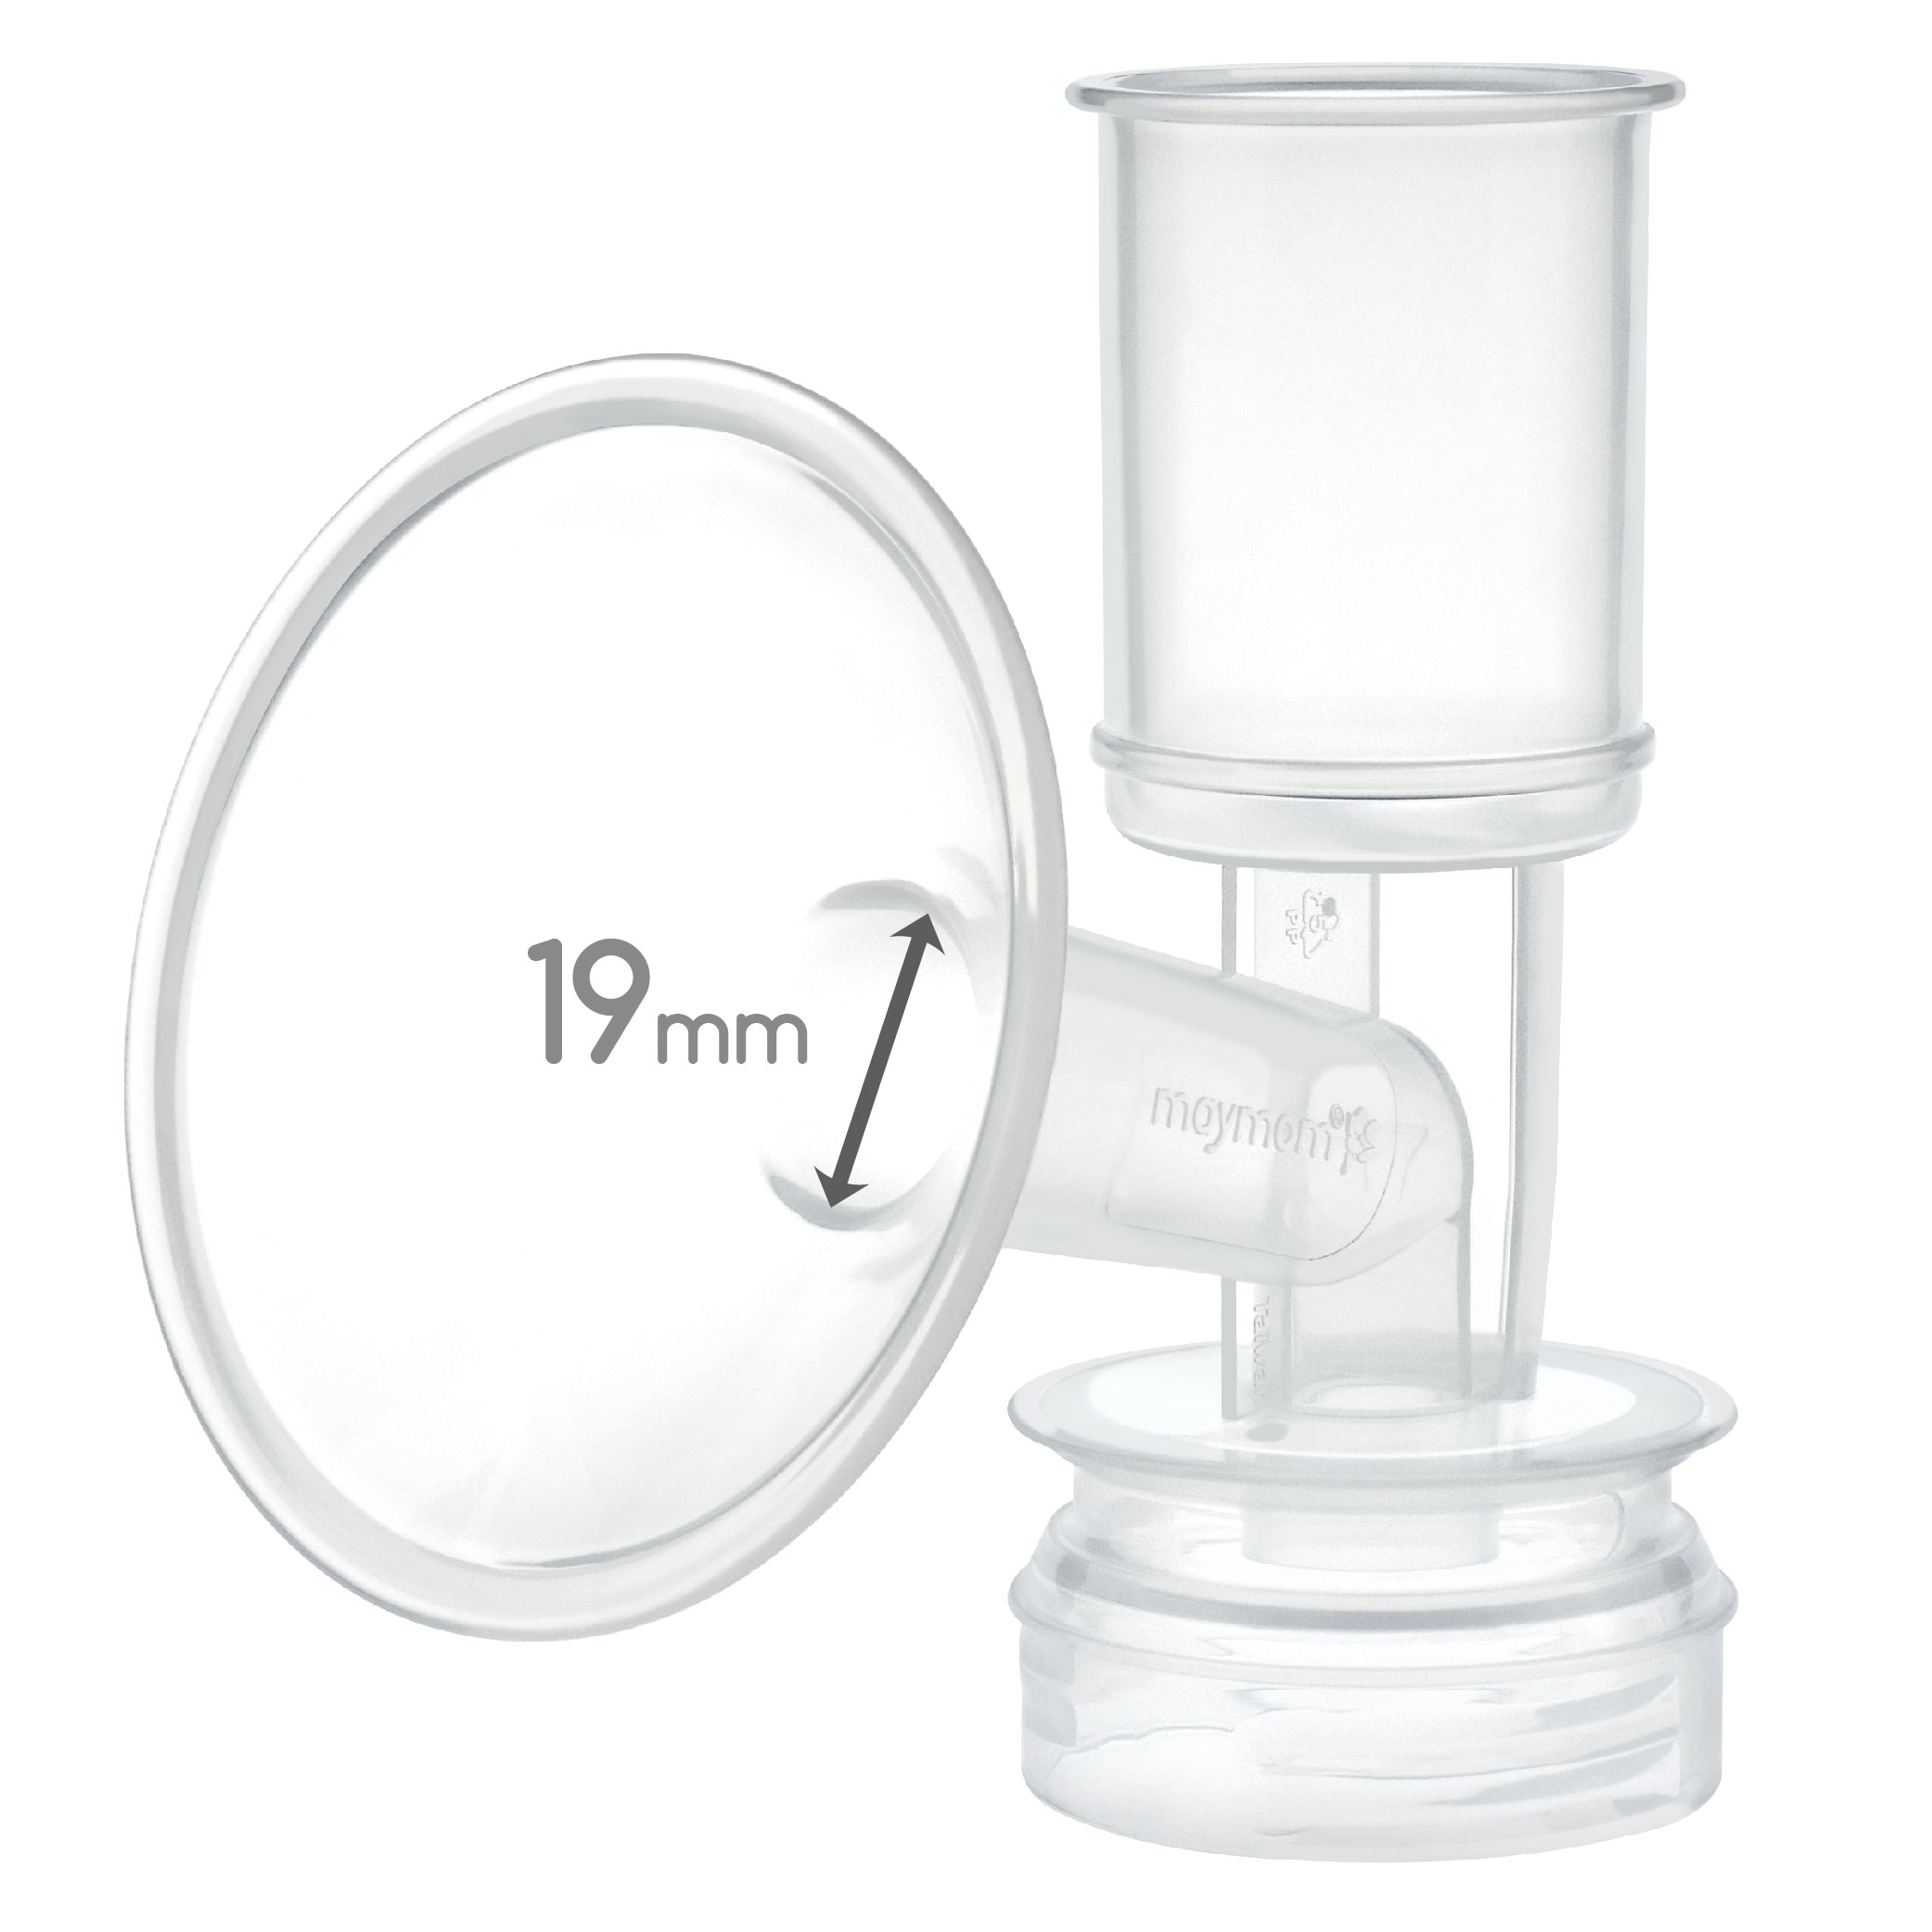 Maymom Breast Shield Flange Compatible with Ameda Breast Pumps (19 mm, Small, 1-Piece)